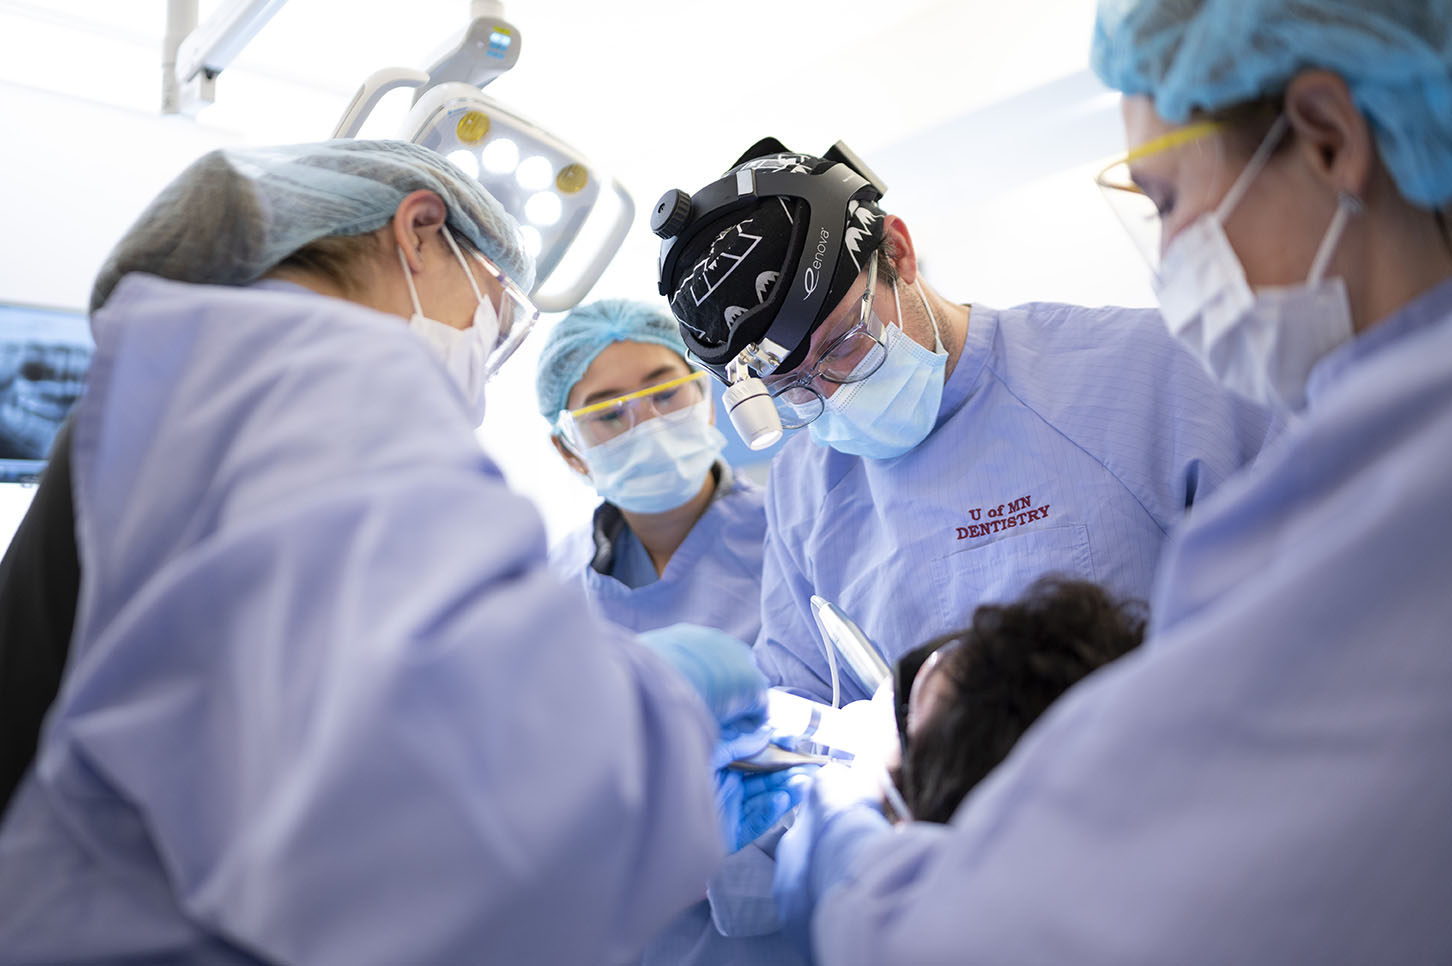 Oral and Facial Surgery residents care for a patient